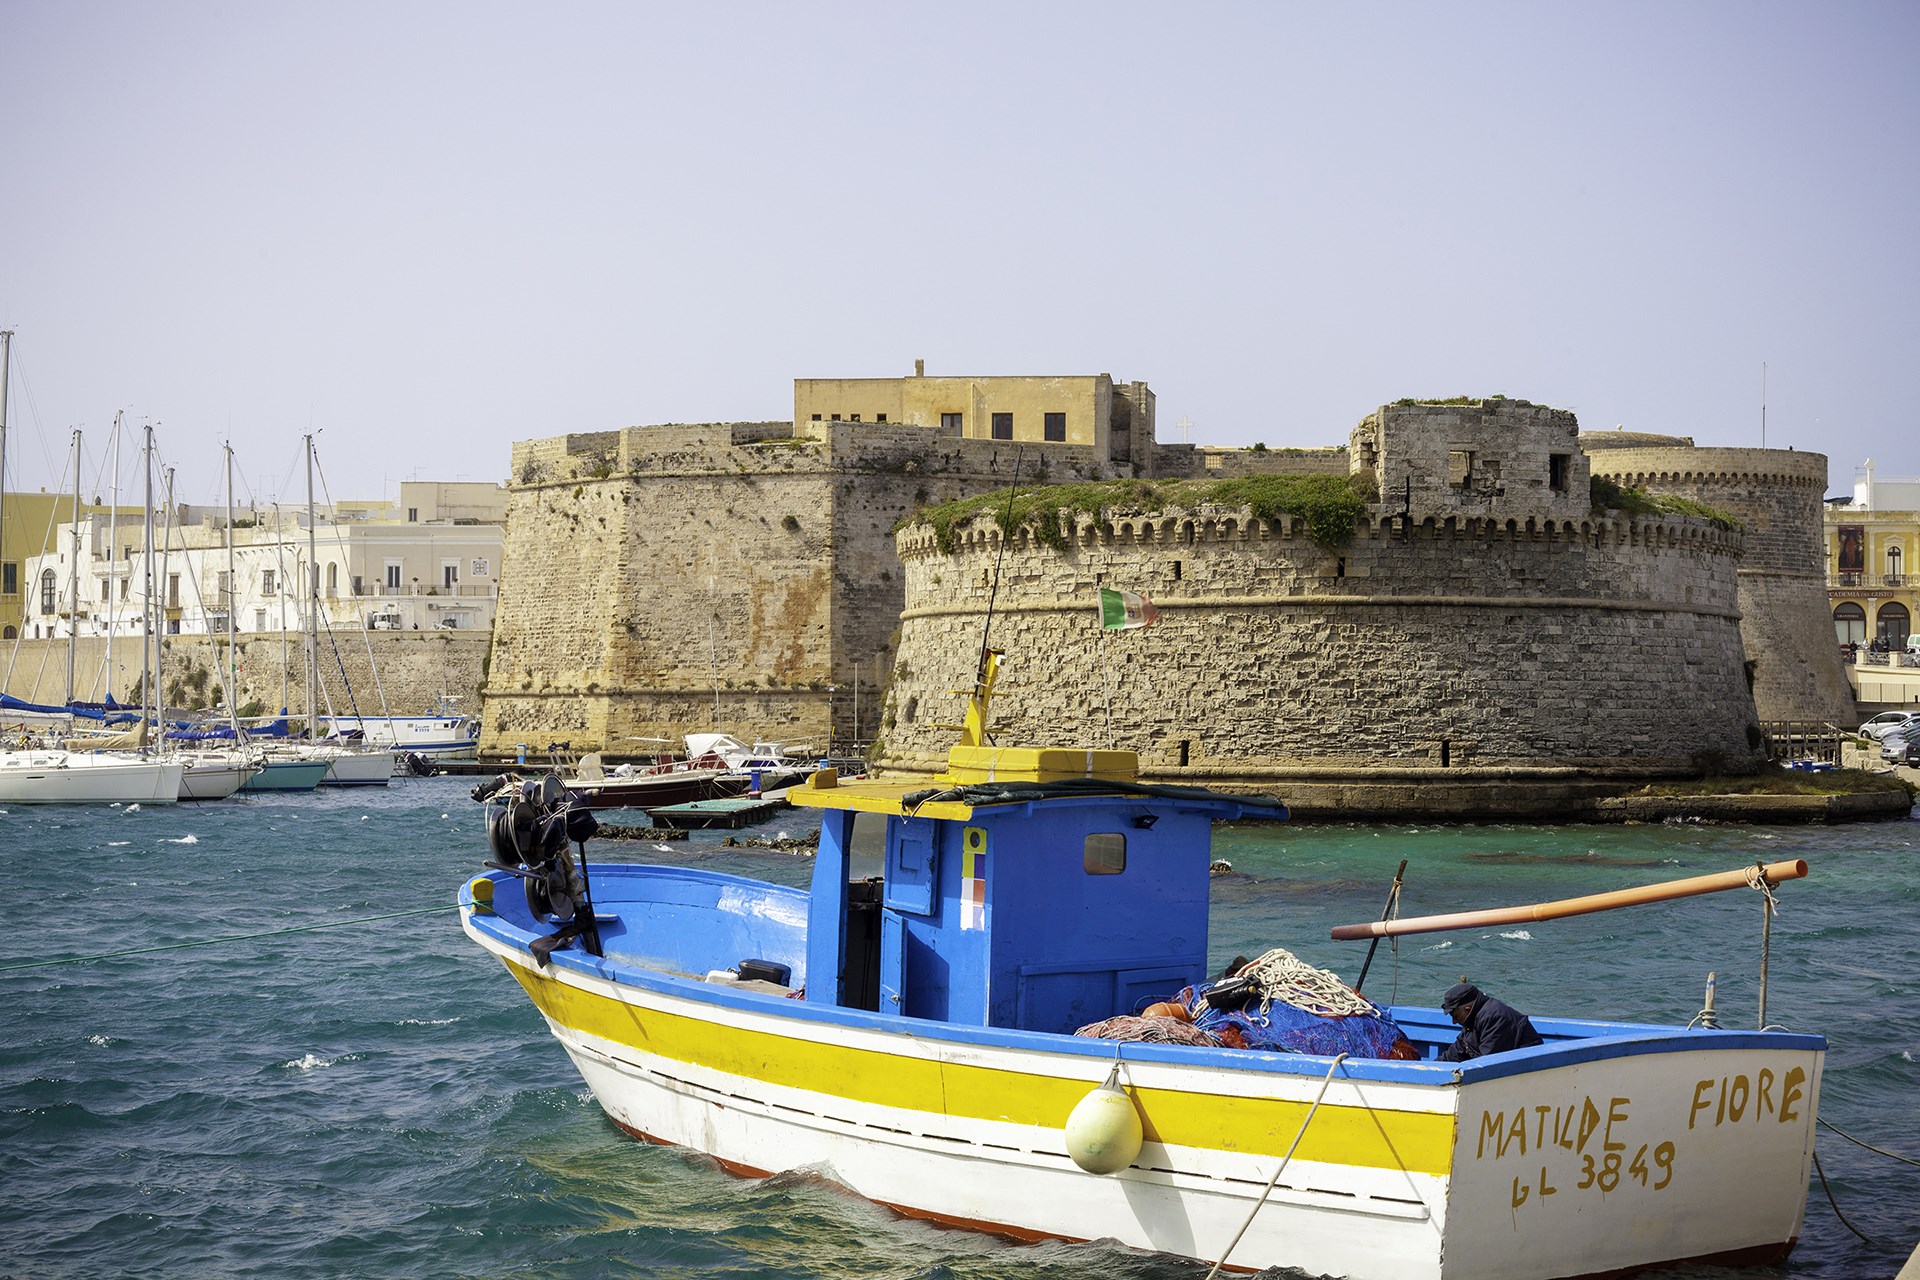 Discover the history of Puglia - Italy's hidden gem